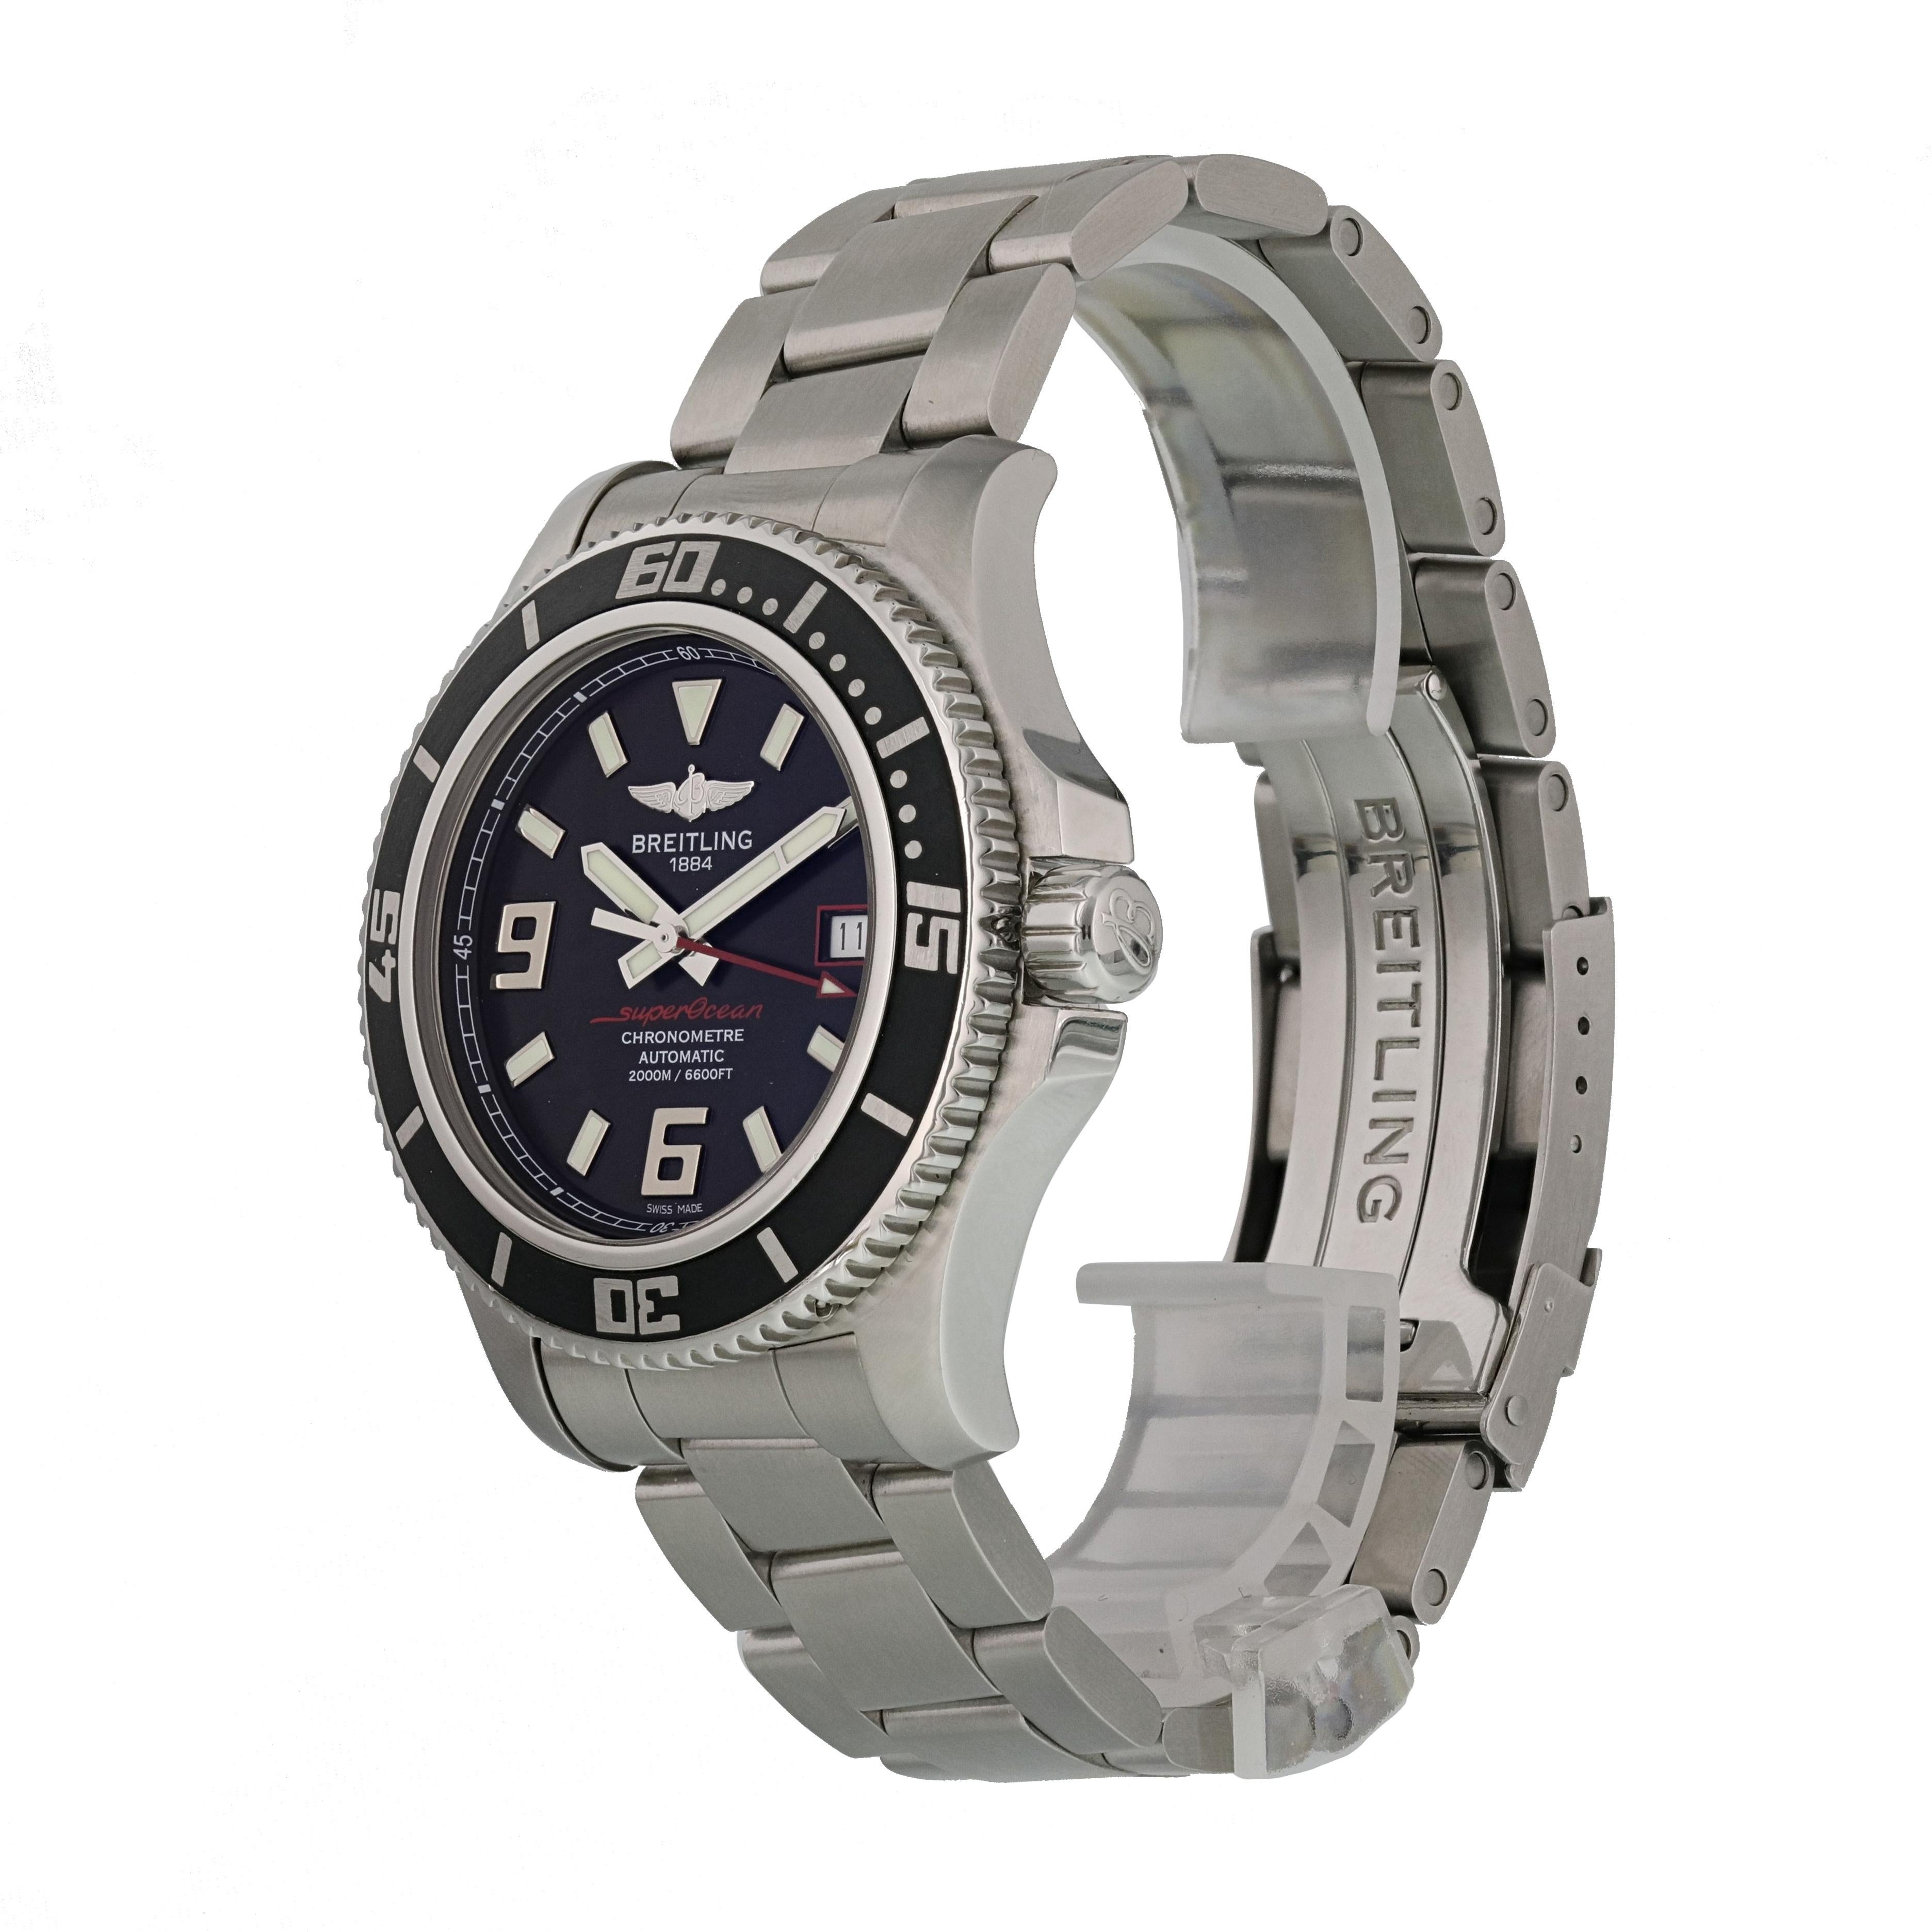 Breitling Superocean A17391 Men's Watch. 
42mm Stainless Steel case. 
Stainless Steel Unidirectional bezel. 
Black dial with Luminous Steel hands and Arabic numeral hour markers. 
Minute markers on the outer dial. 
Date display at the 3 o'clock